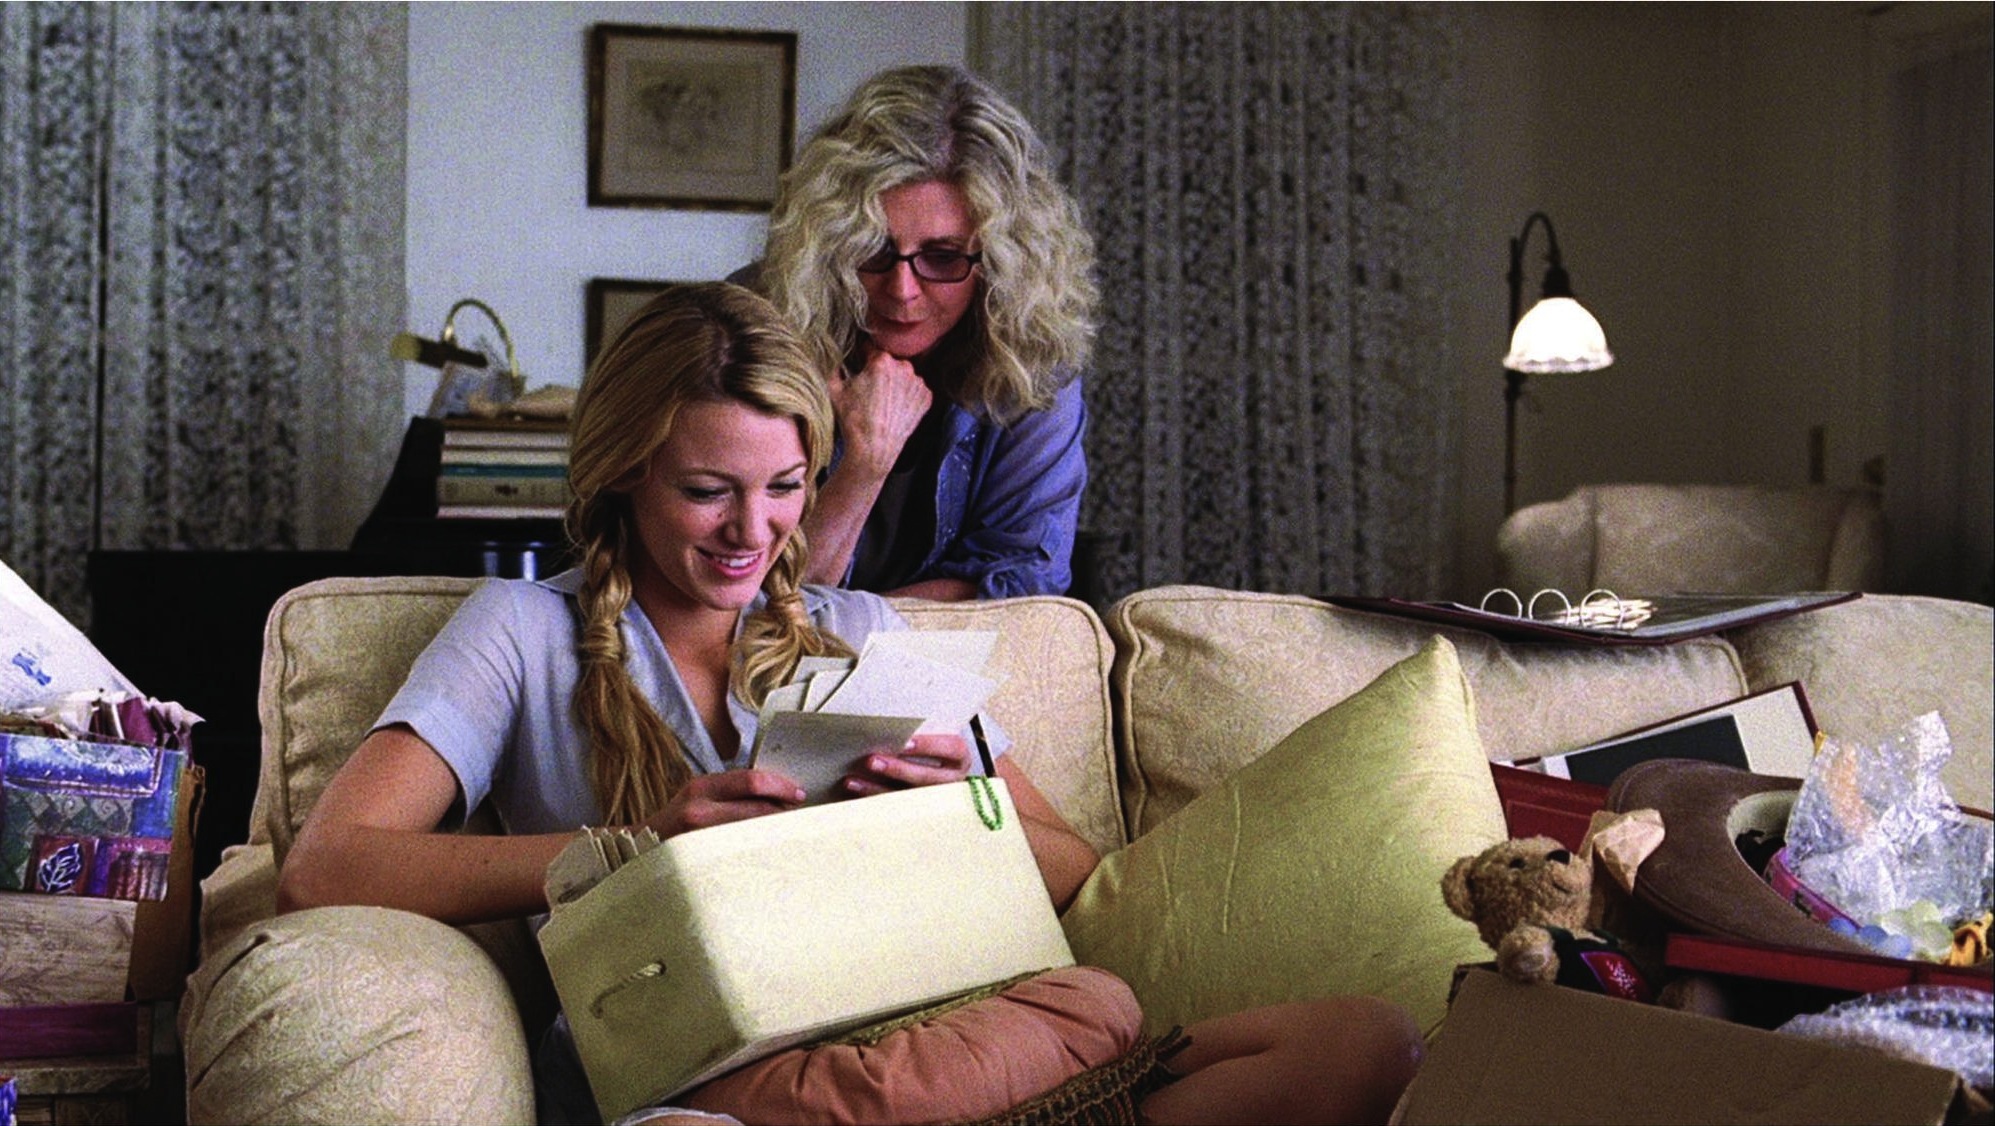 Still of Blythe Danner and Blake Lively in The Sisterhood of the Traveling Pants 2 (2008)